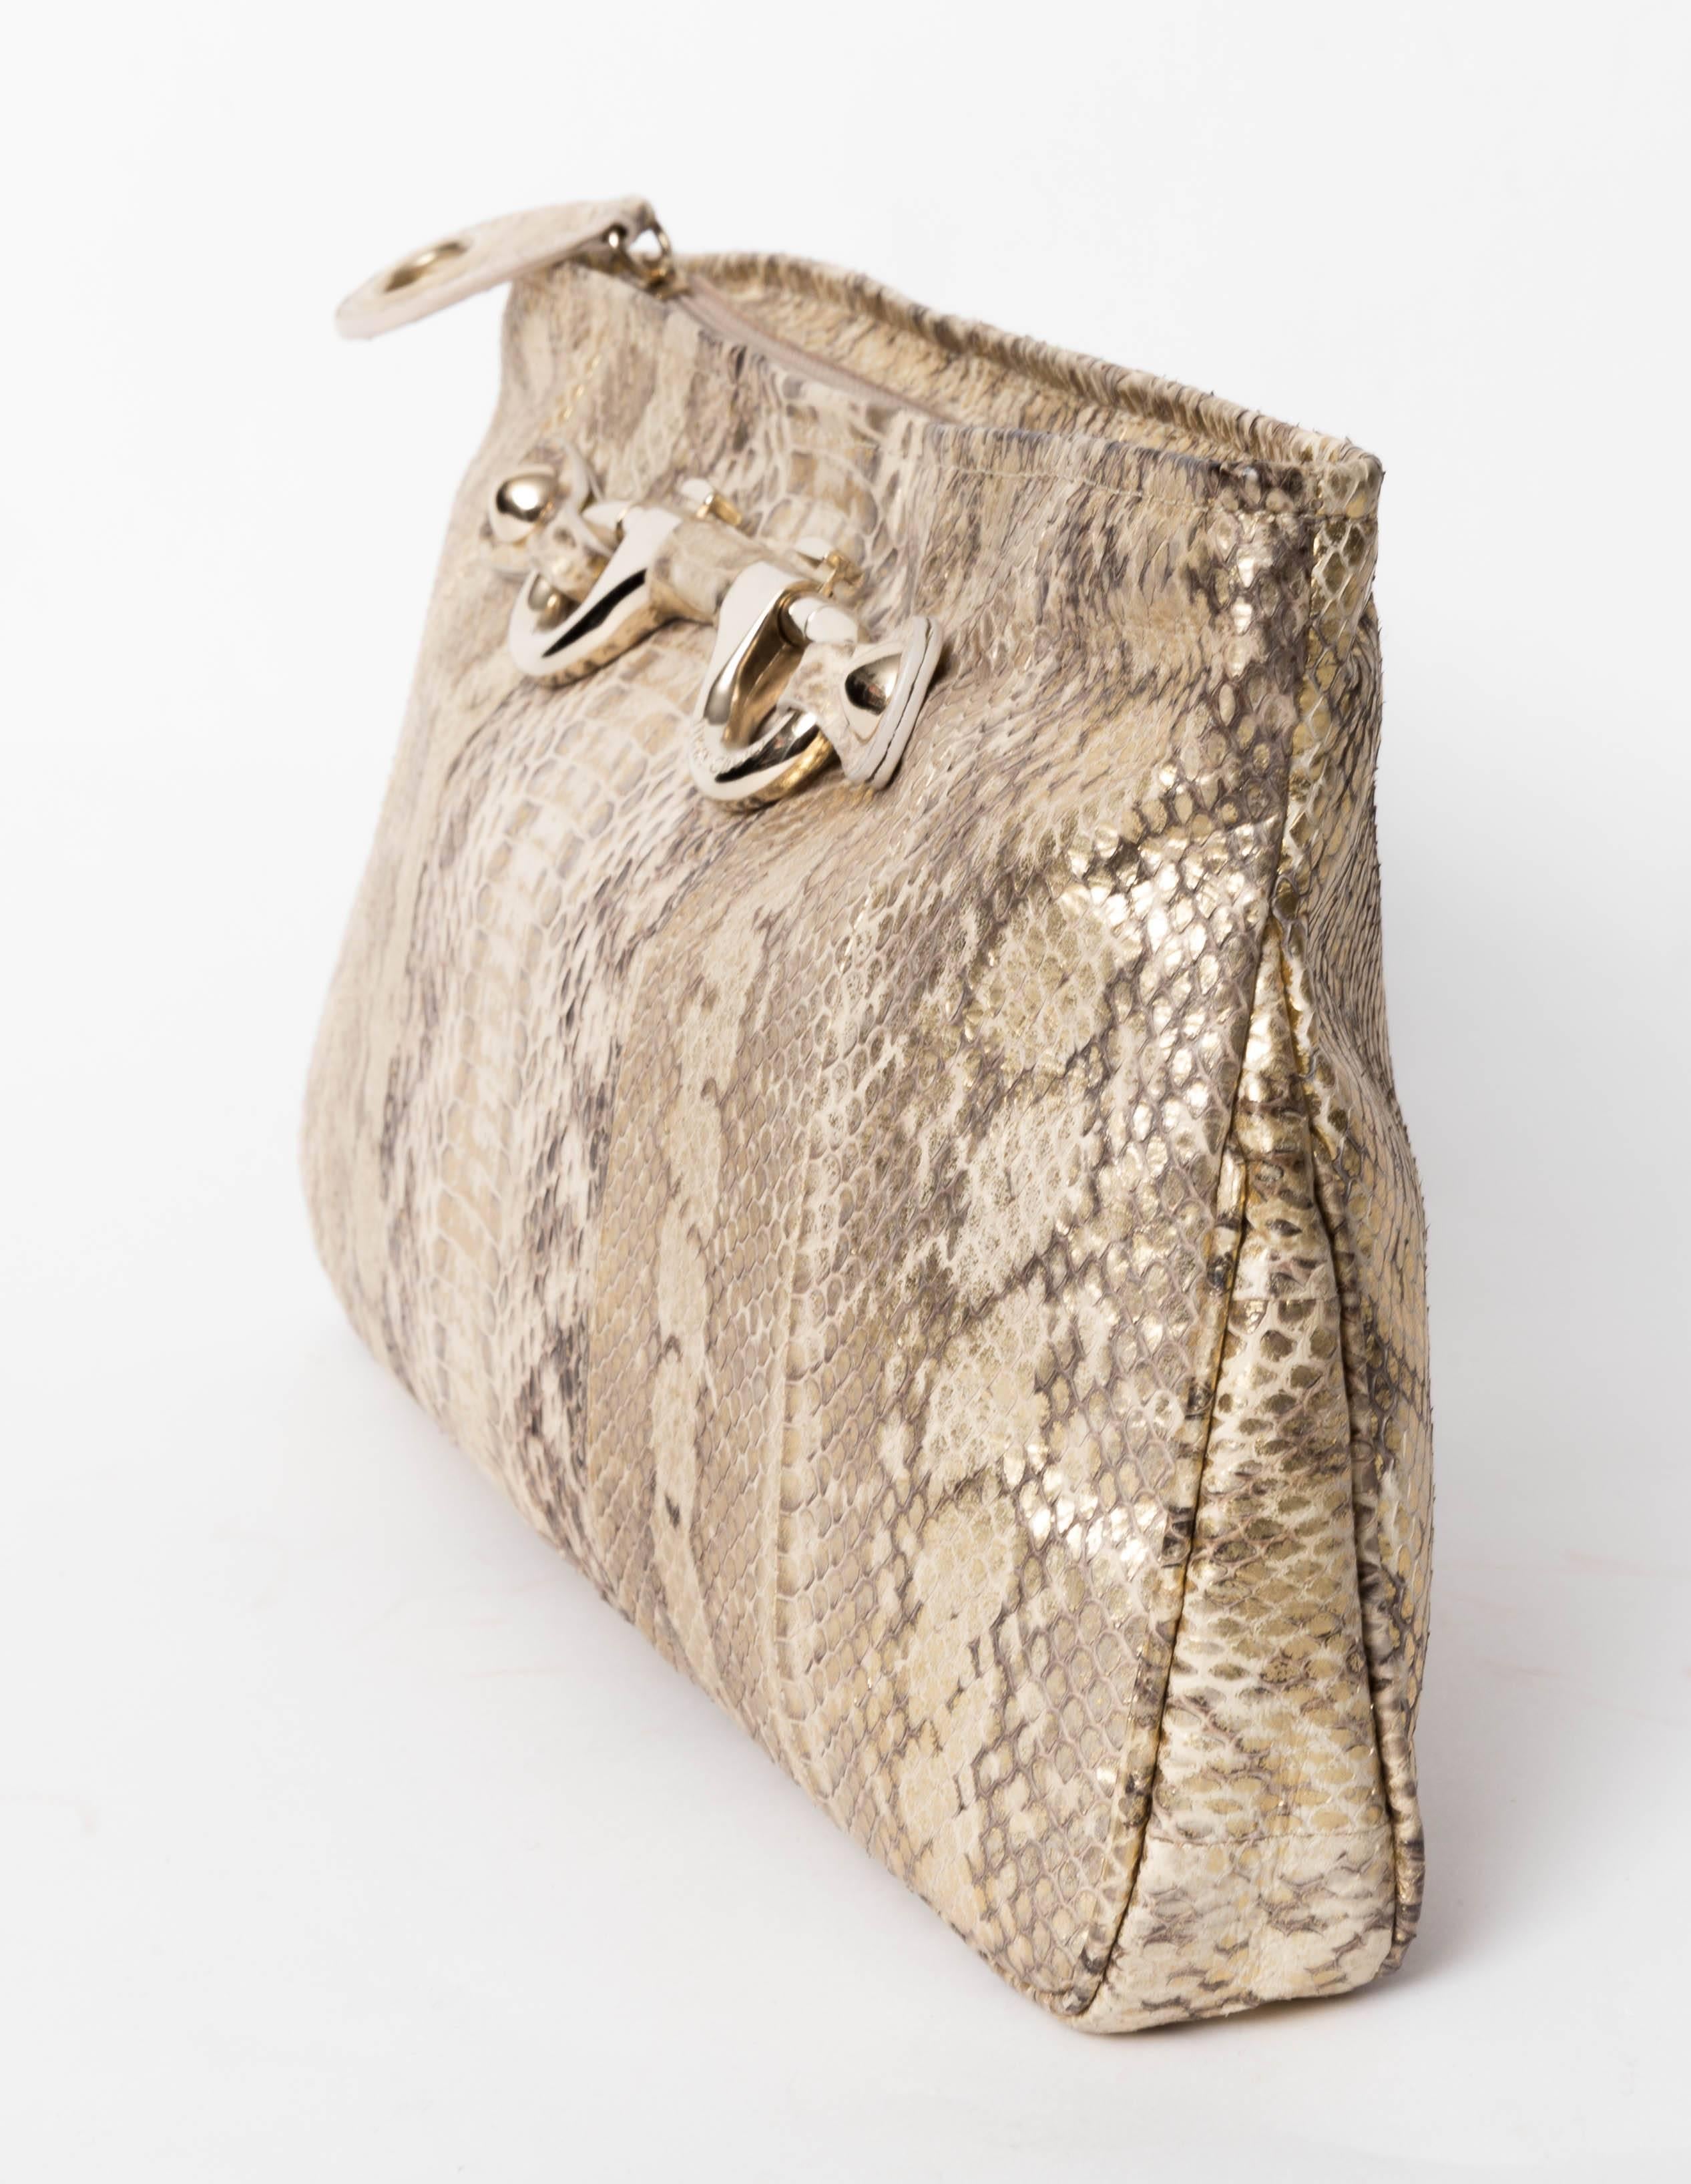 Jimmy Choo Gold and Tan Snakeskin Clutch with Silver  Horsebit Detail. Closes with a zip ending in a snake tab pull.  Lining is a gold grosgrain ribbon with one flap pocket. There are makeup stains to the lining. 